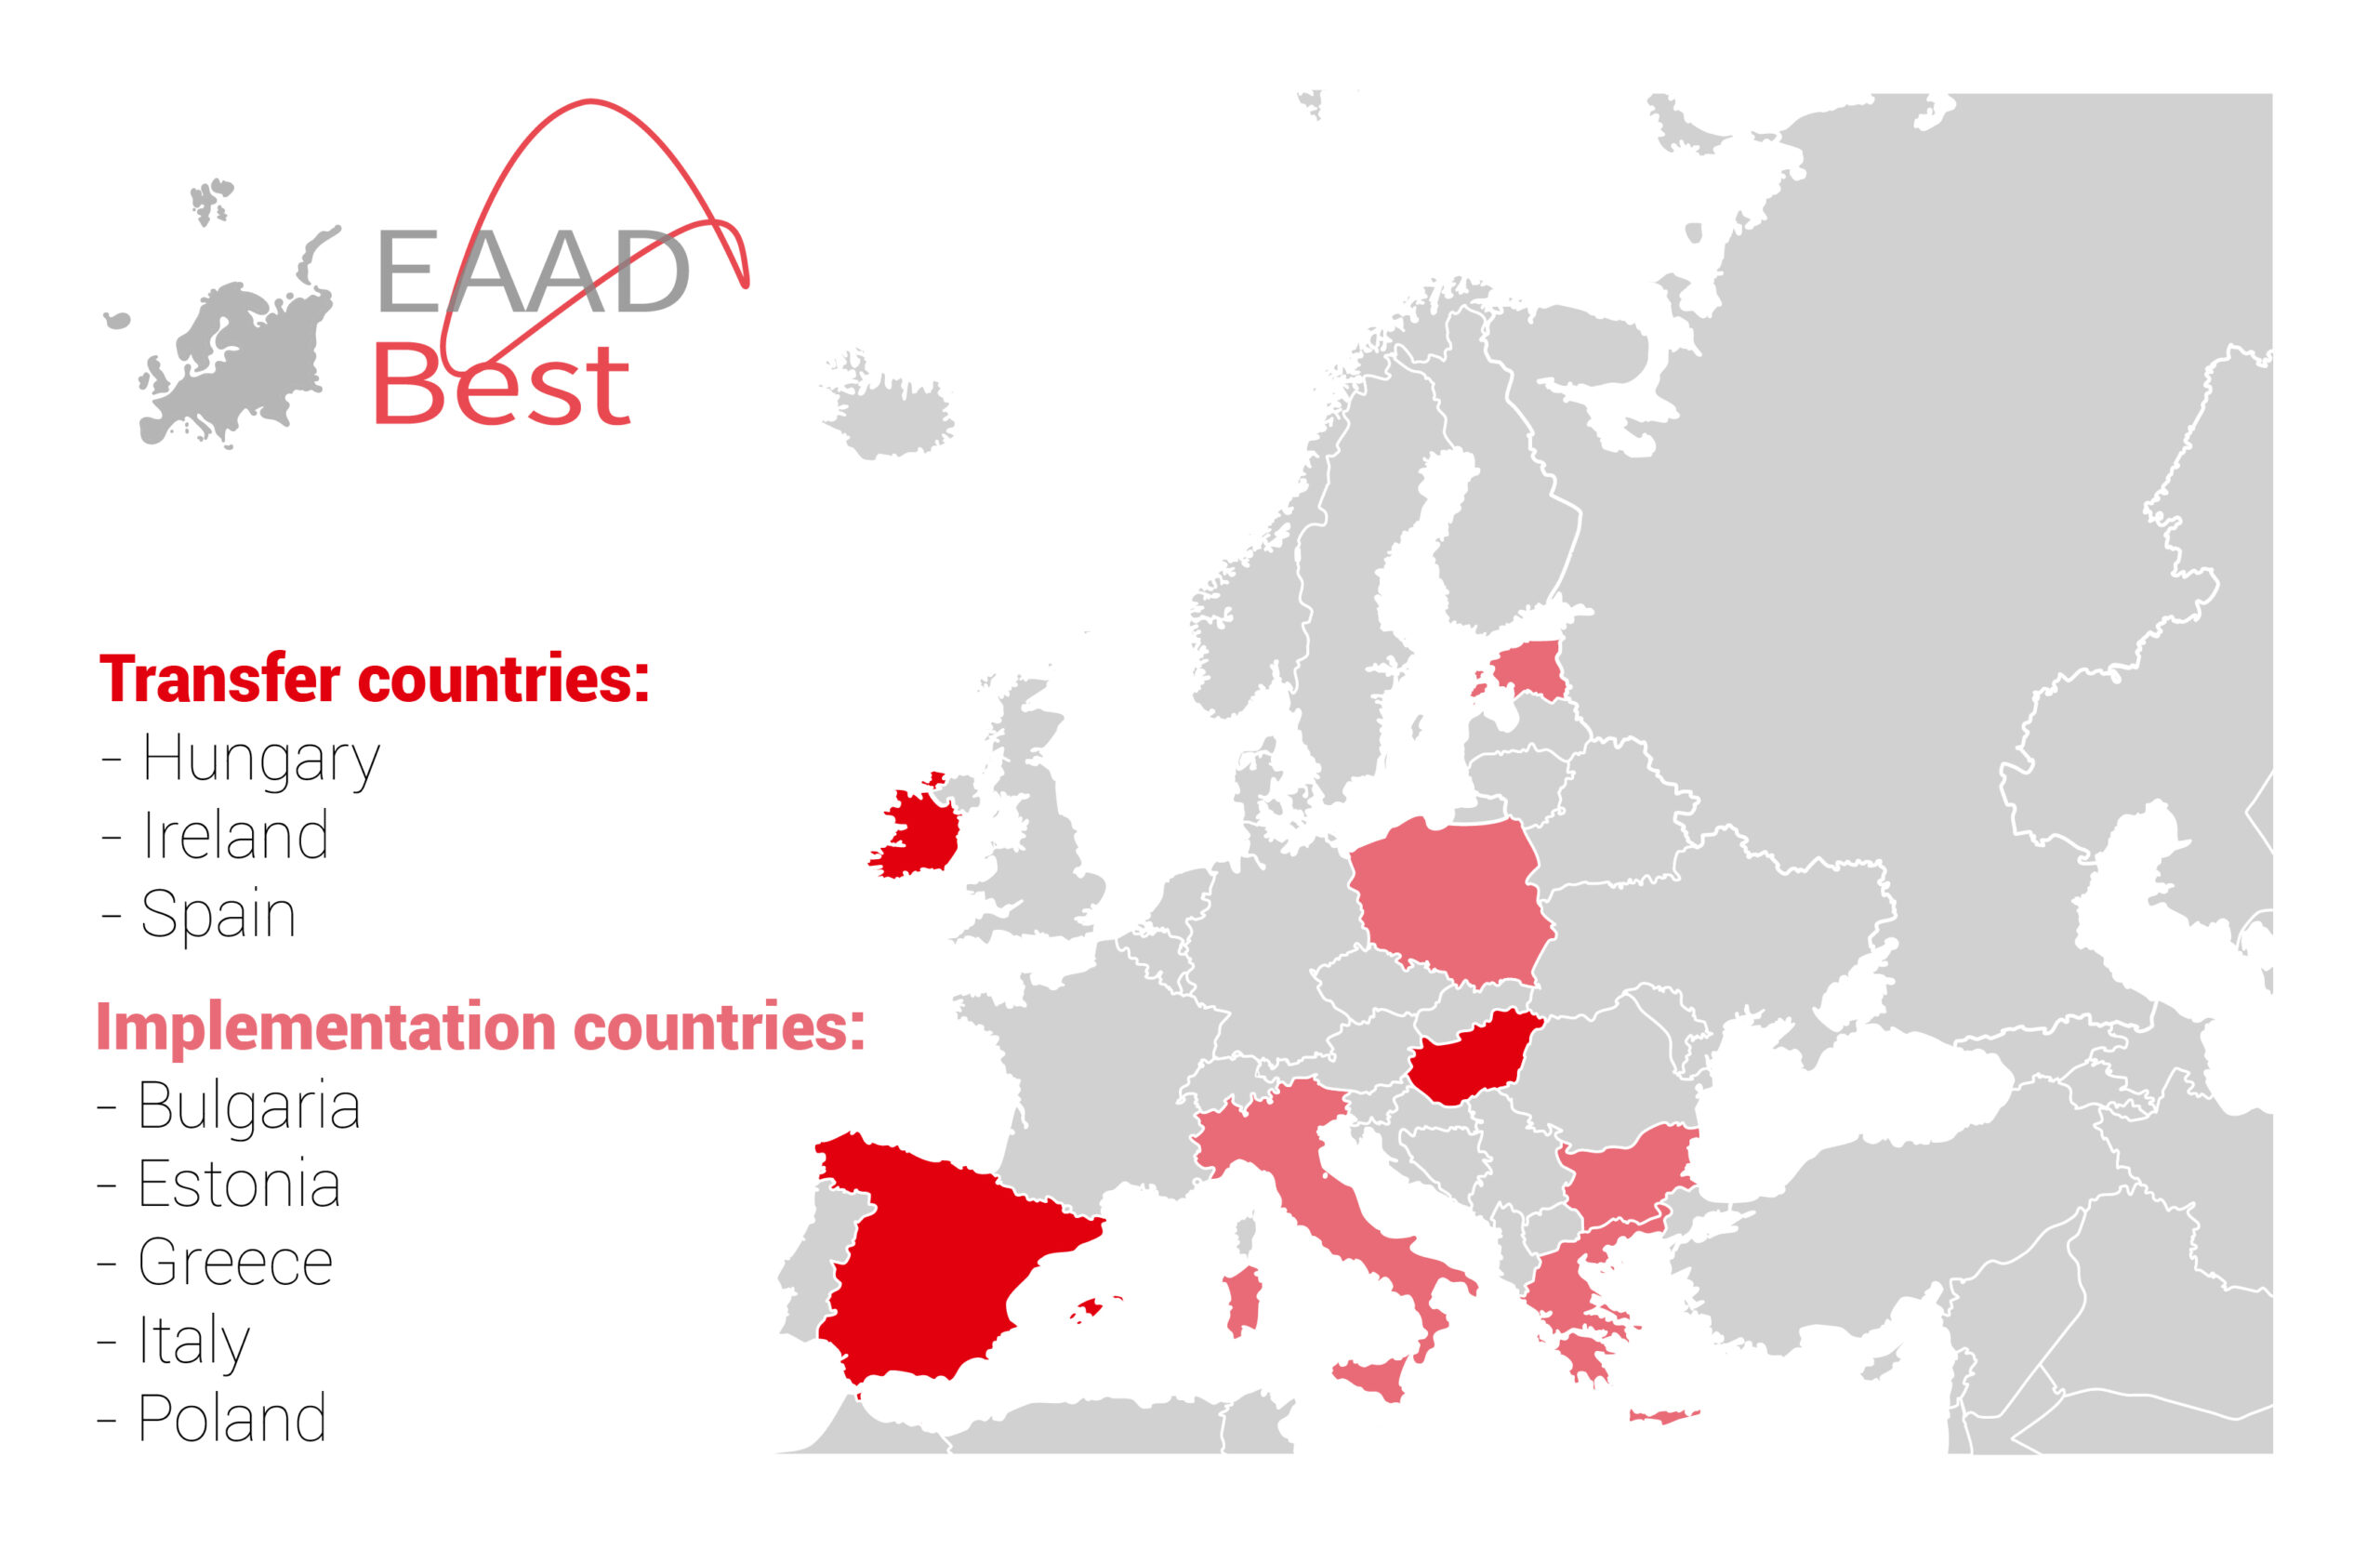 A map of Europe highlighting the EAAD-Best transfer countries (Hungary, Ireland, Spain) and implementation countries (Bulgaria, Estonia, Greece, Italy, Poland) in red.